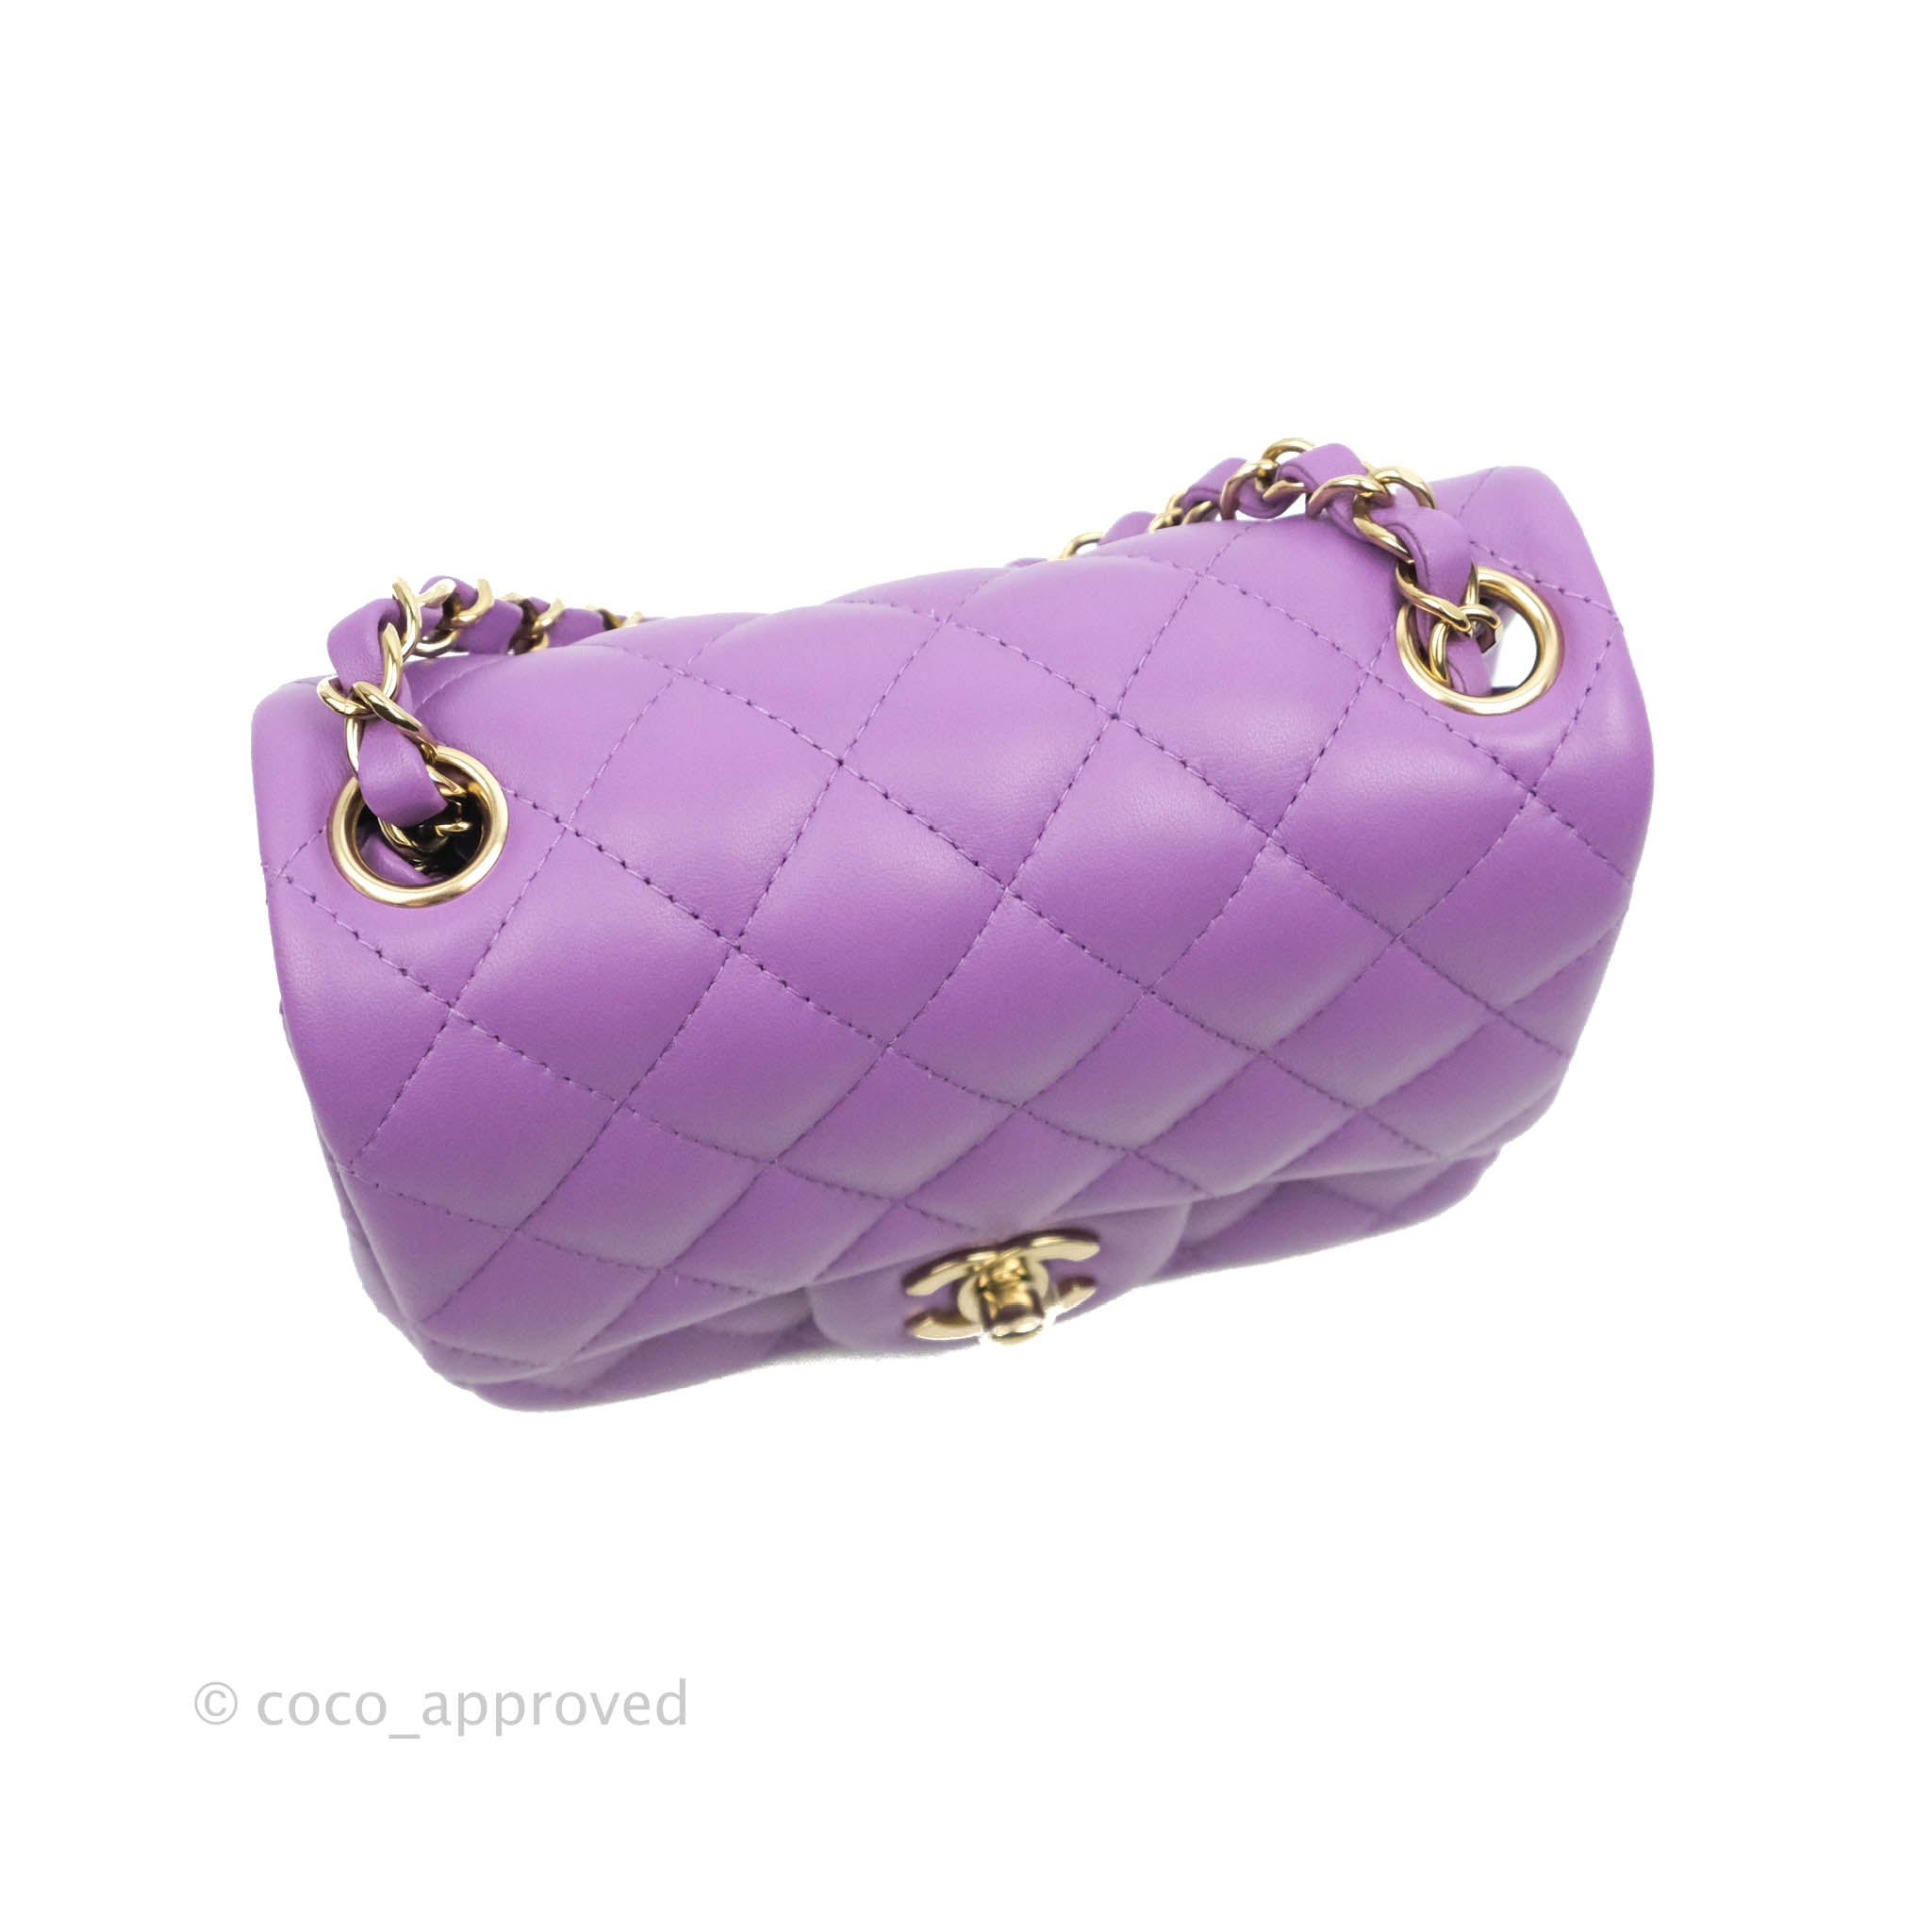 CHANEL Purple Bags & Handbags for Women, Authenticity Guaranteed